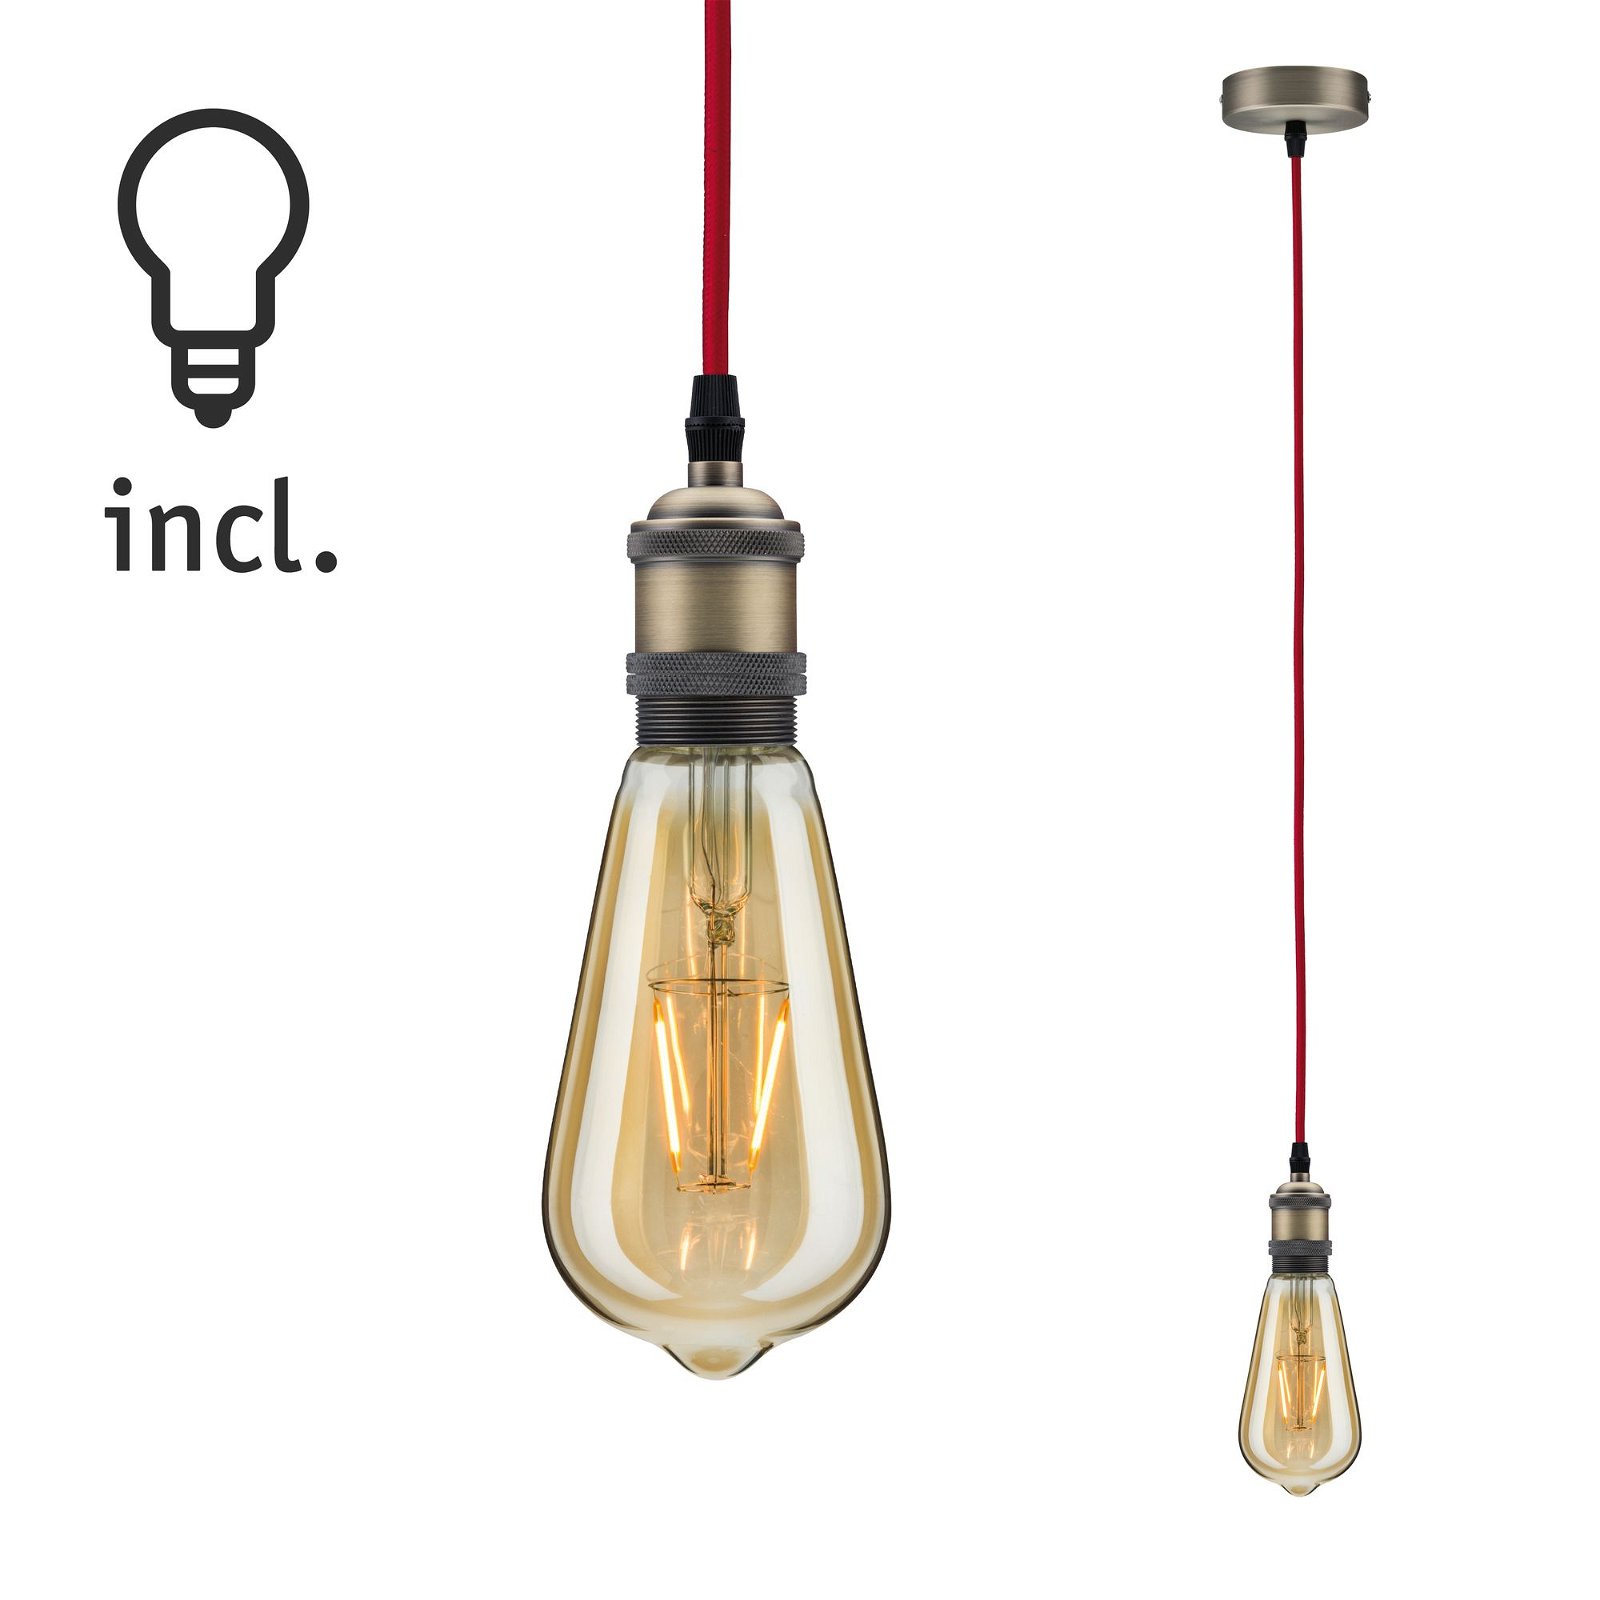 Vintage Edition Bundle Pendant Fabric cable + LED Globe E27 Red/Brushed nickel E27 230V 480lm 6W 1700K dimmable Gold